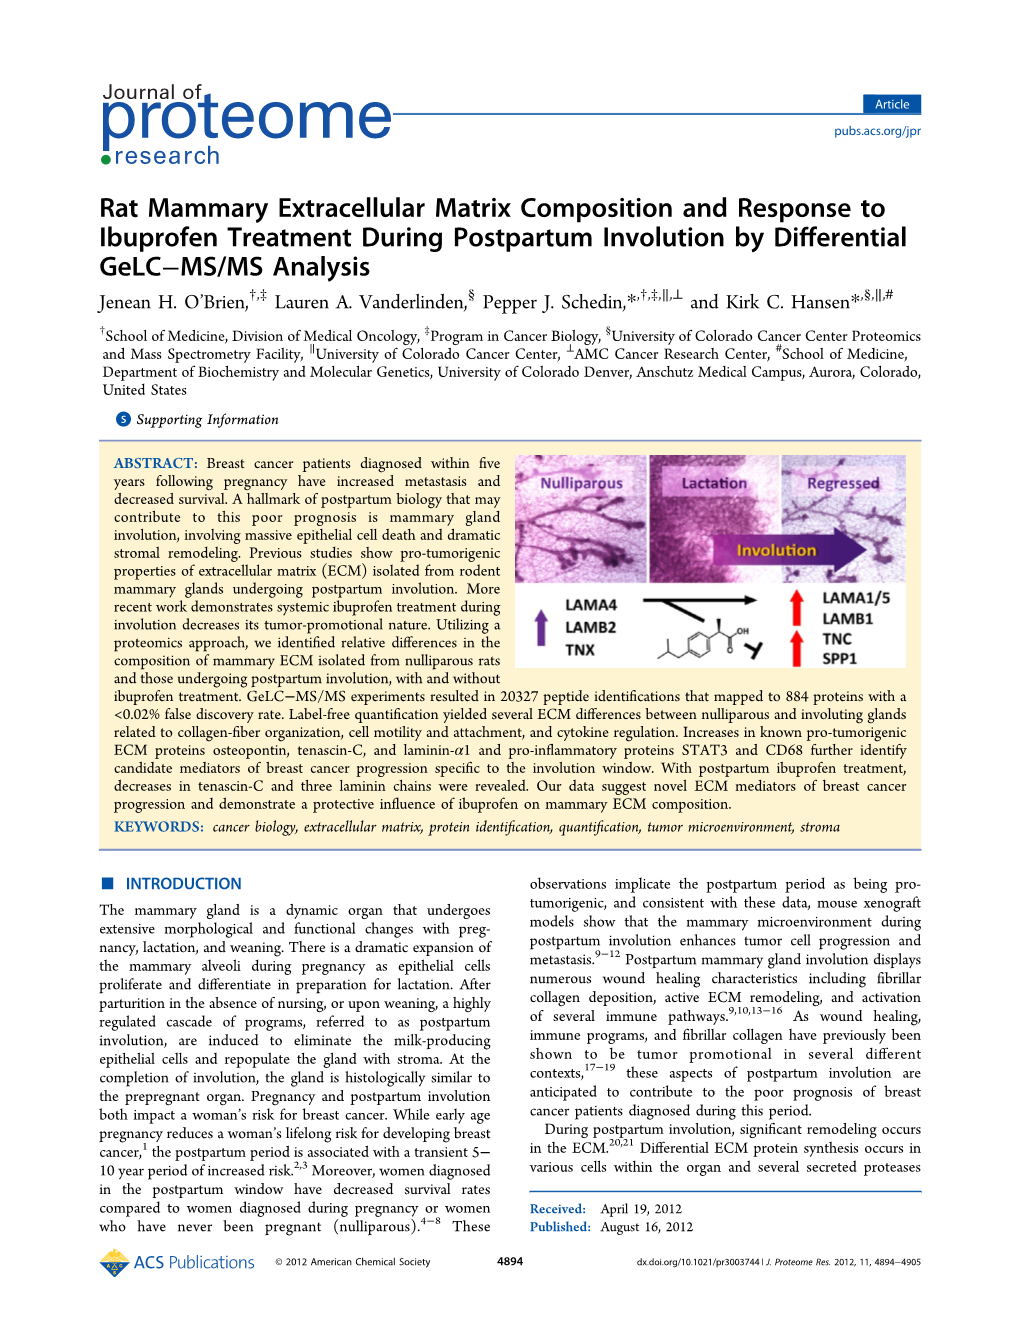 Rat Mammary Extracellular Matrix Composition and Response to Ibuprofen Treatment During Postpartum Involution by Differential Ge